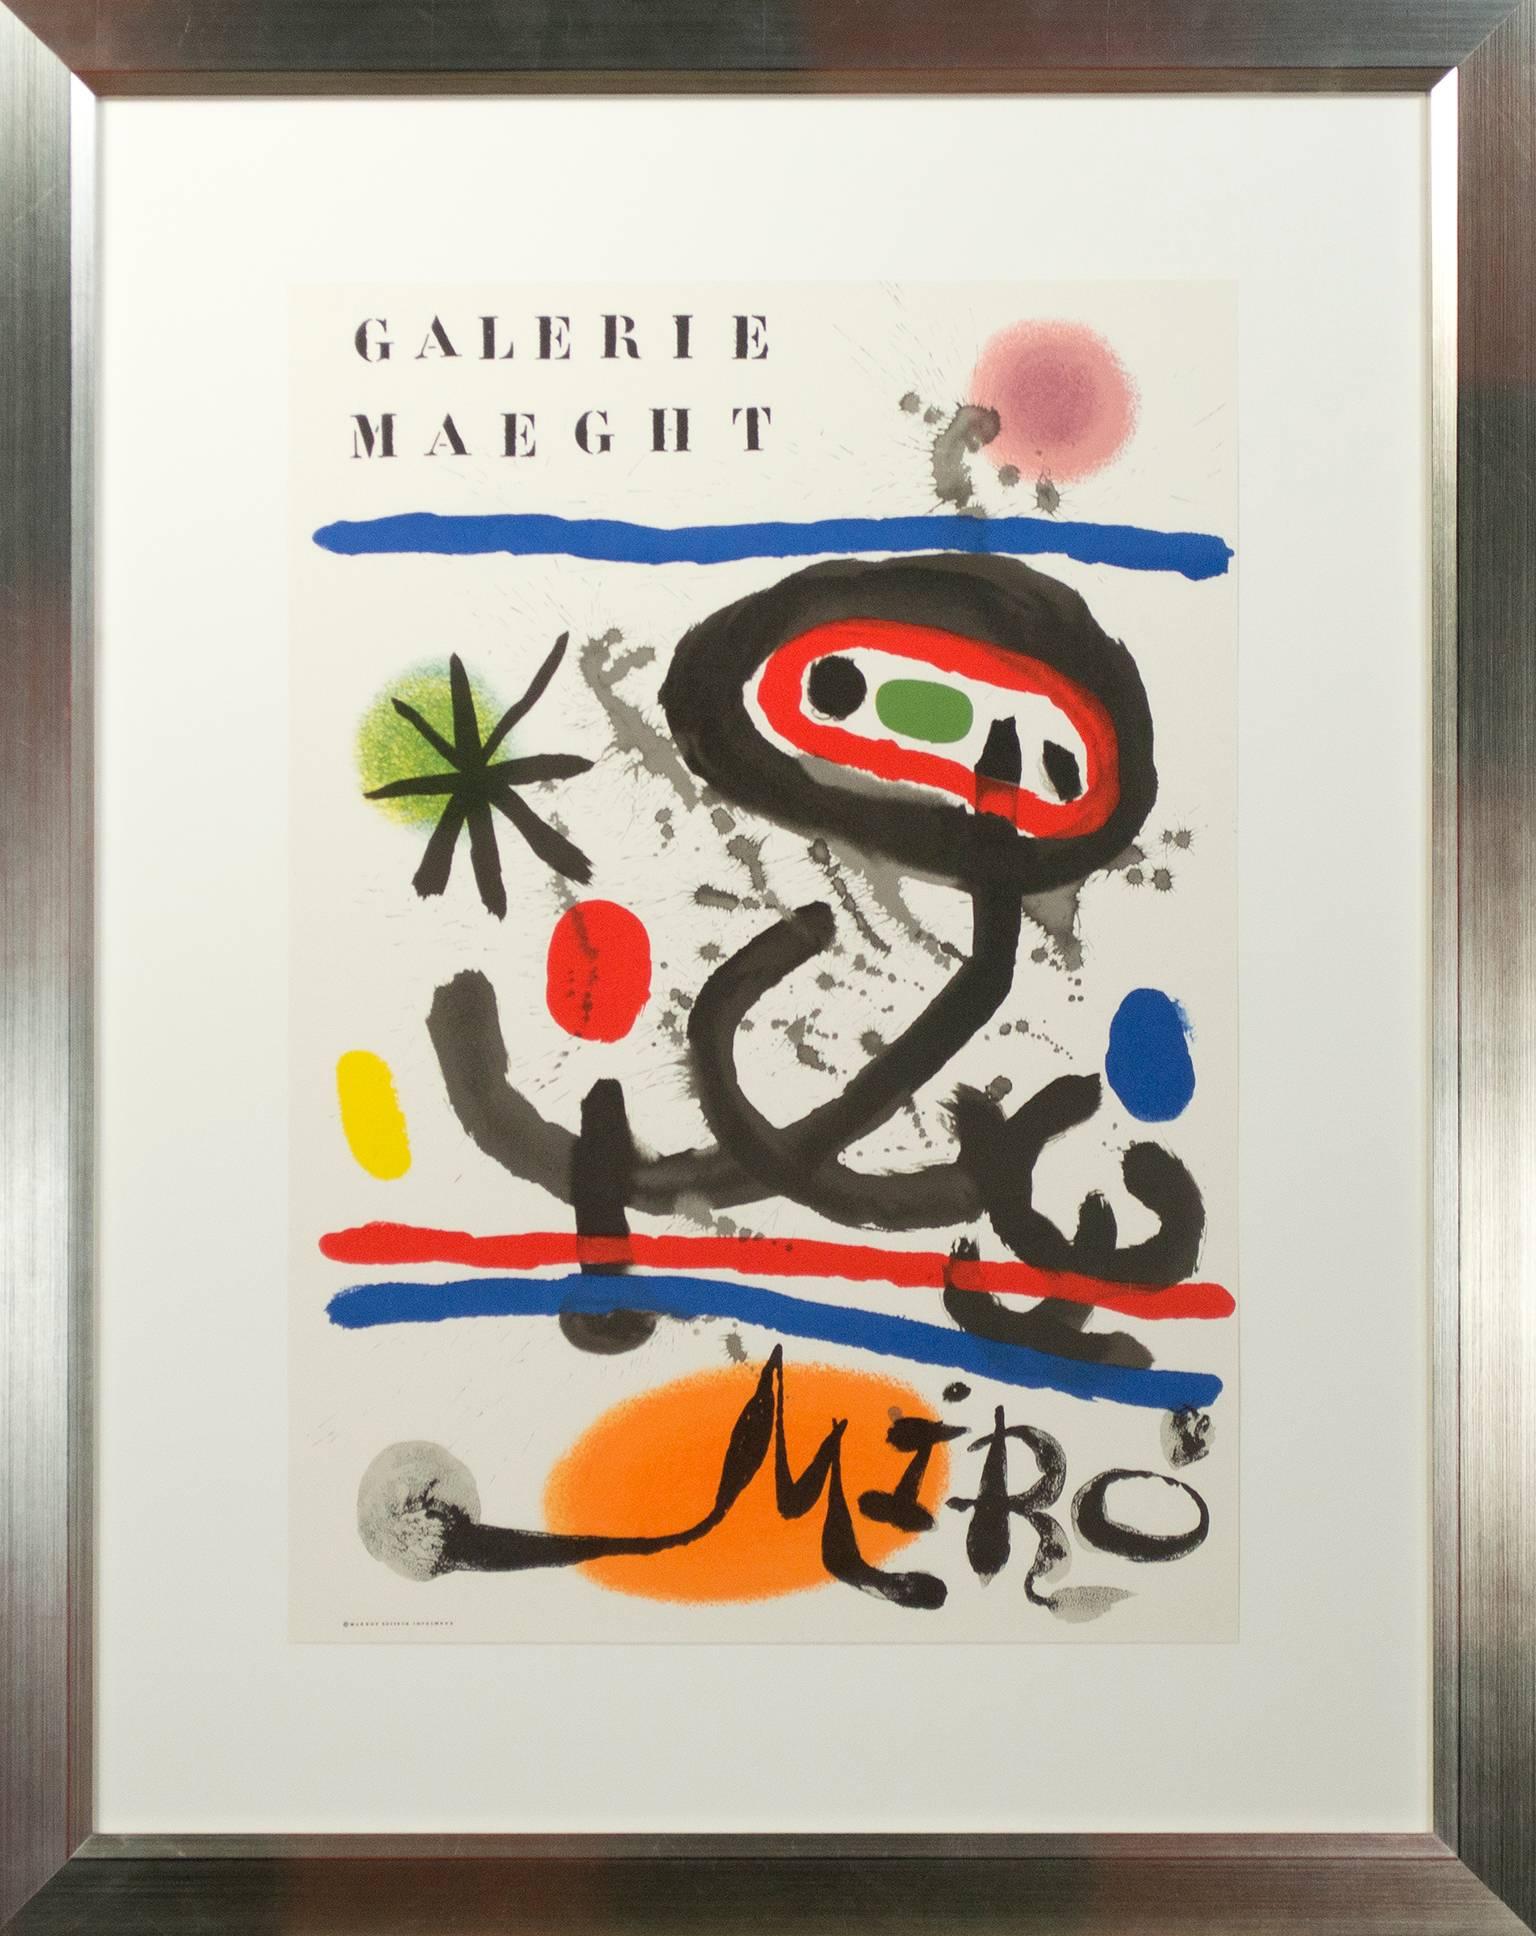 galerie maeght miro poster